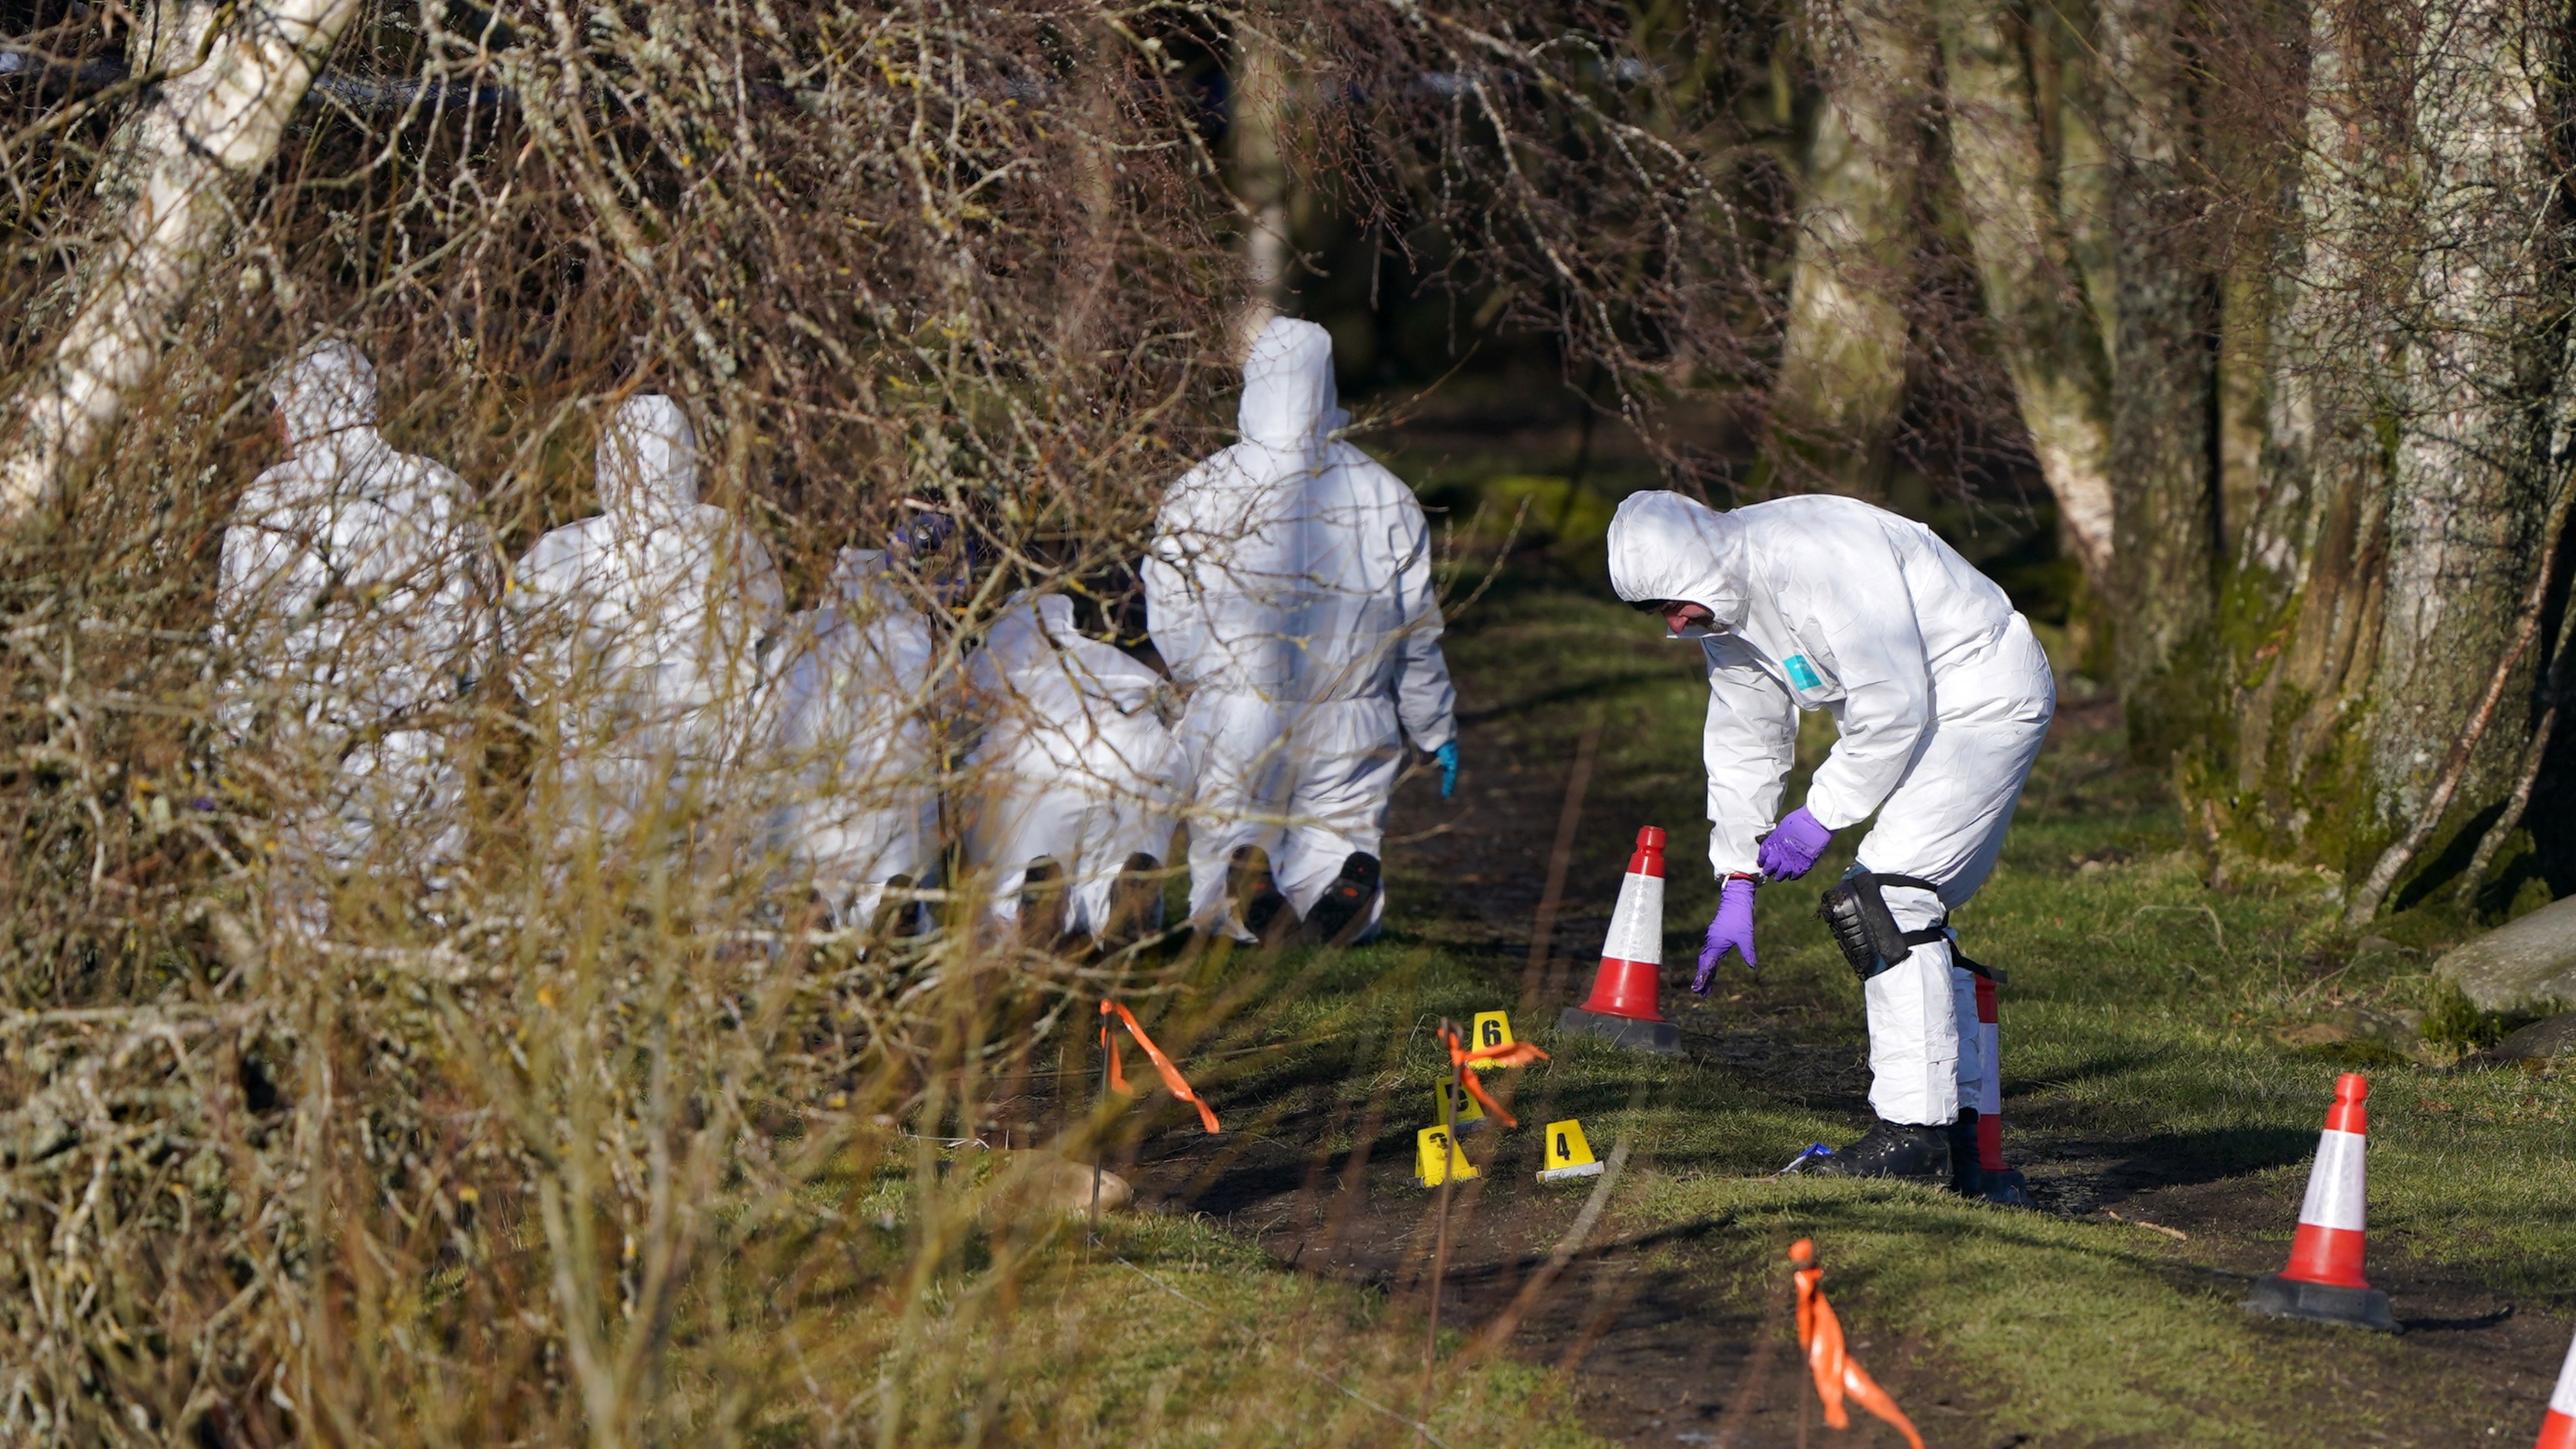 Forensics experts examined the scene of the shooting near the hamlet of Pitilie